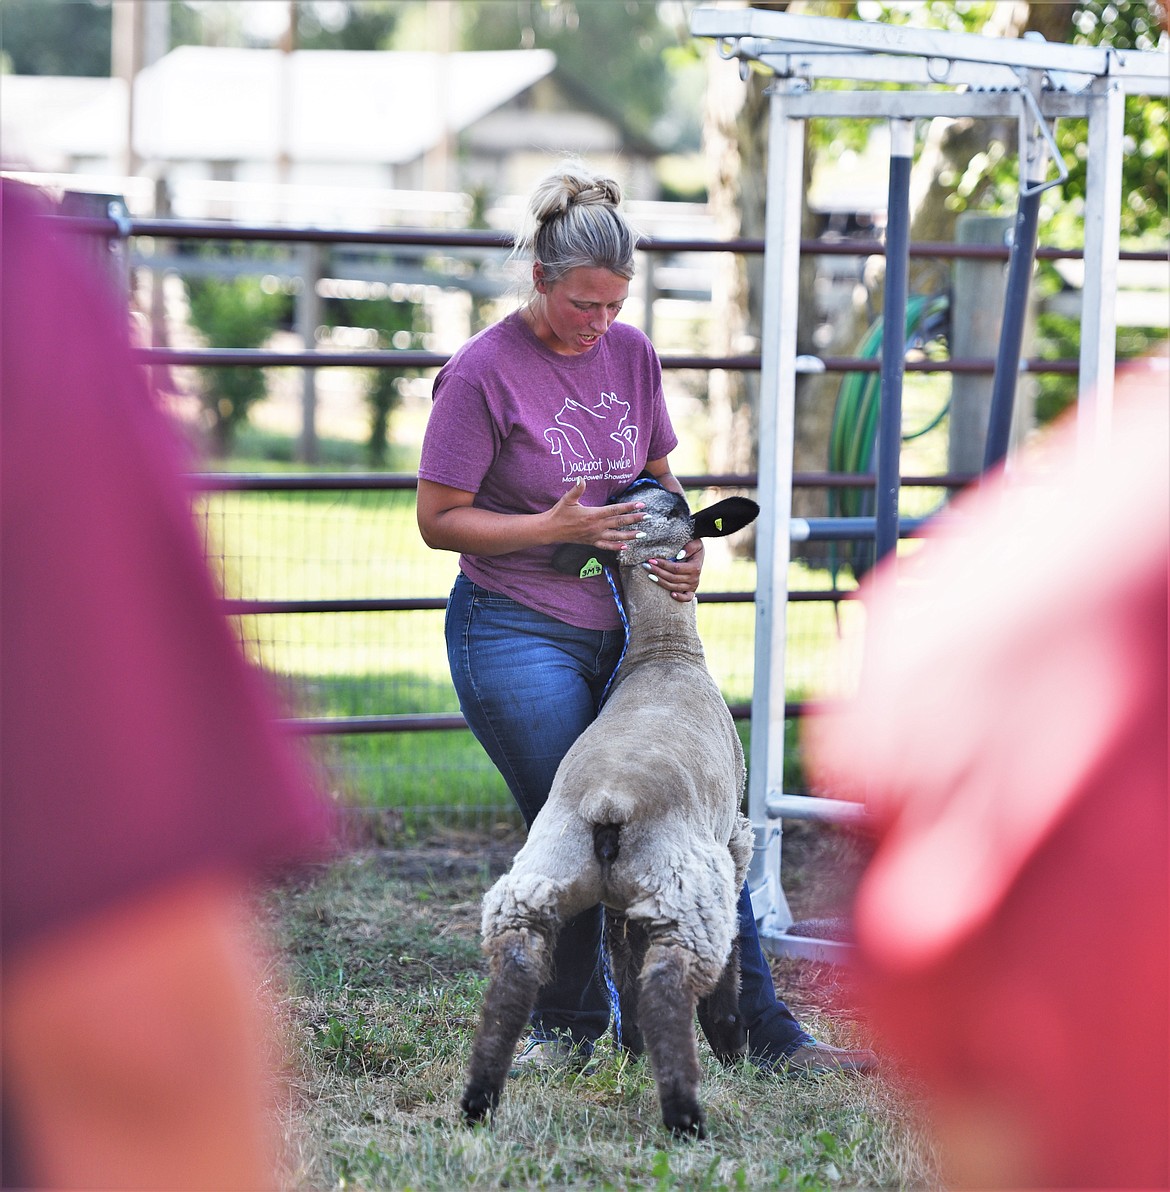 Kayla Lowery of Deer Lodge shows students how to hold a sheep during judging. (Scot Heisel/Lake County Leader)